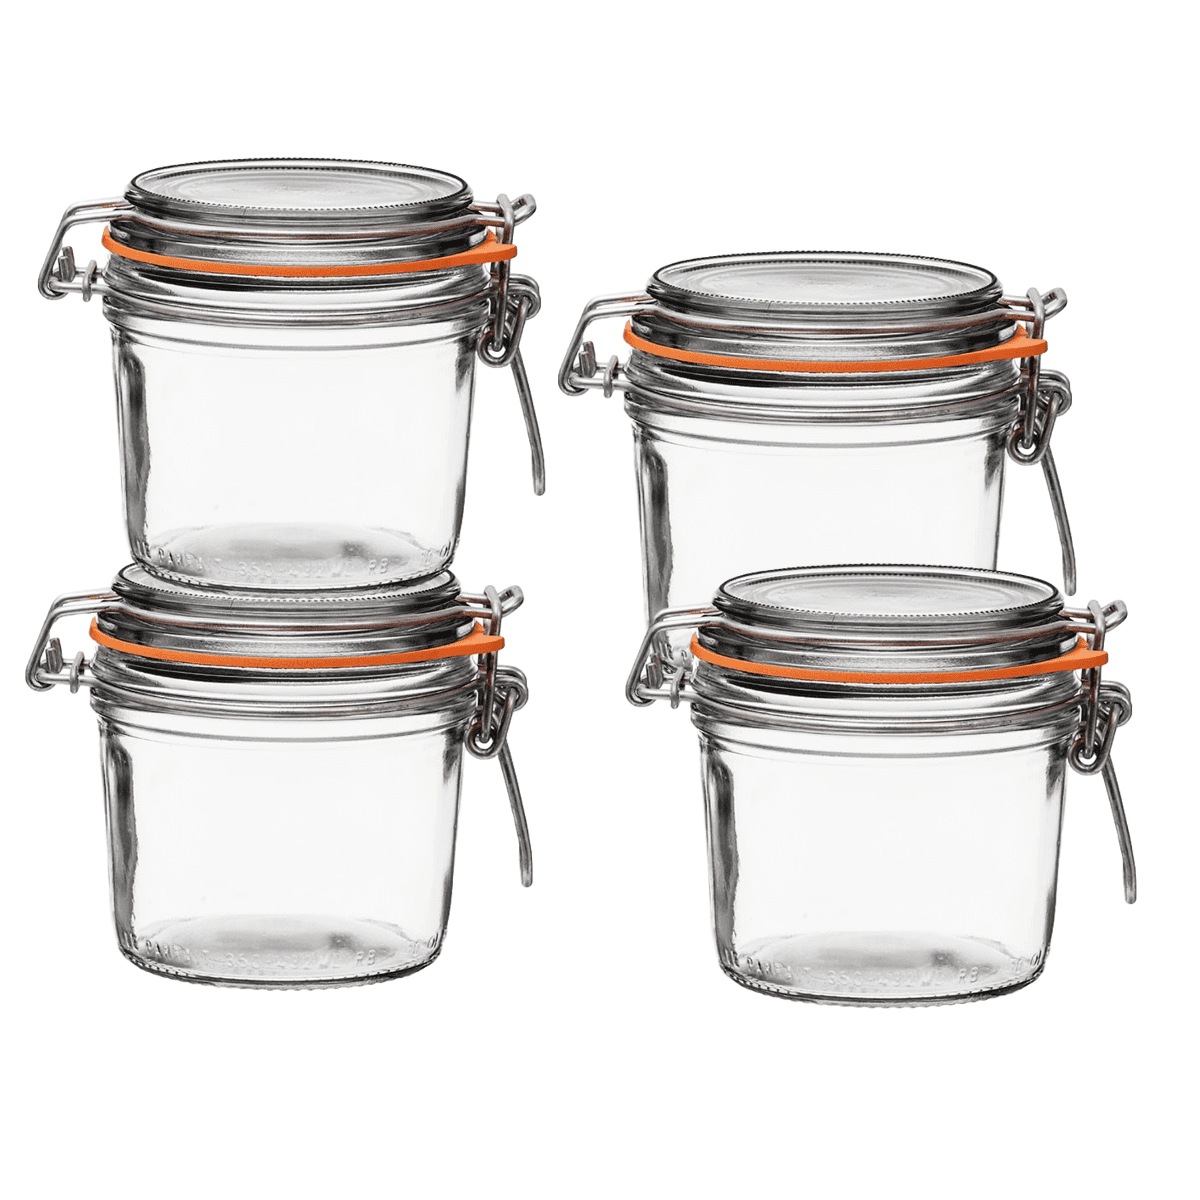 125 Grams with 70 mm Gasket Le Parfait French Super Terrine Wide Mouth Jar Pack of 3 